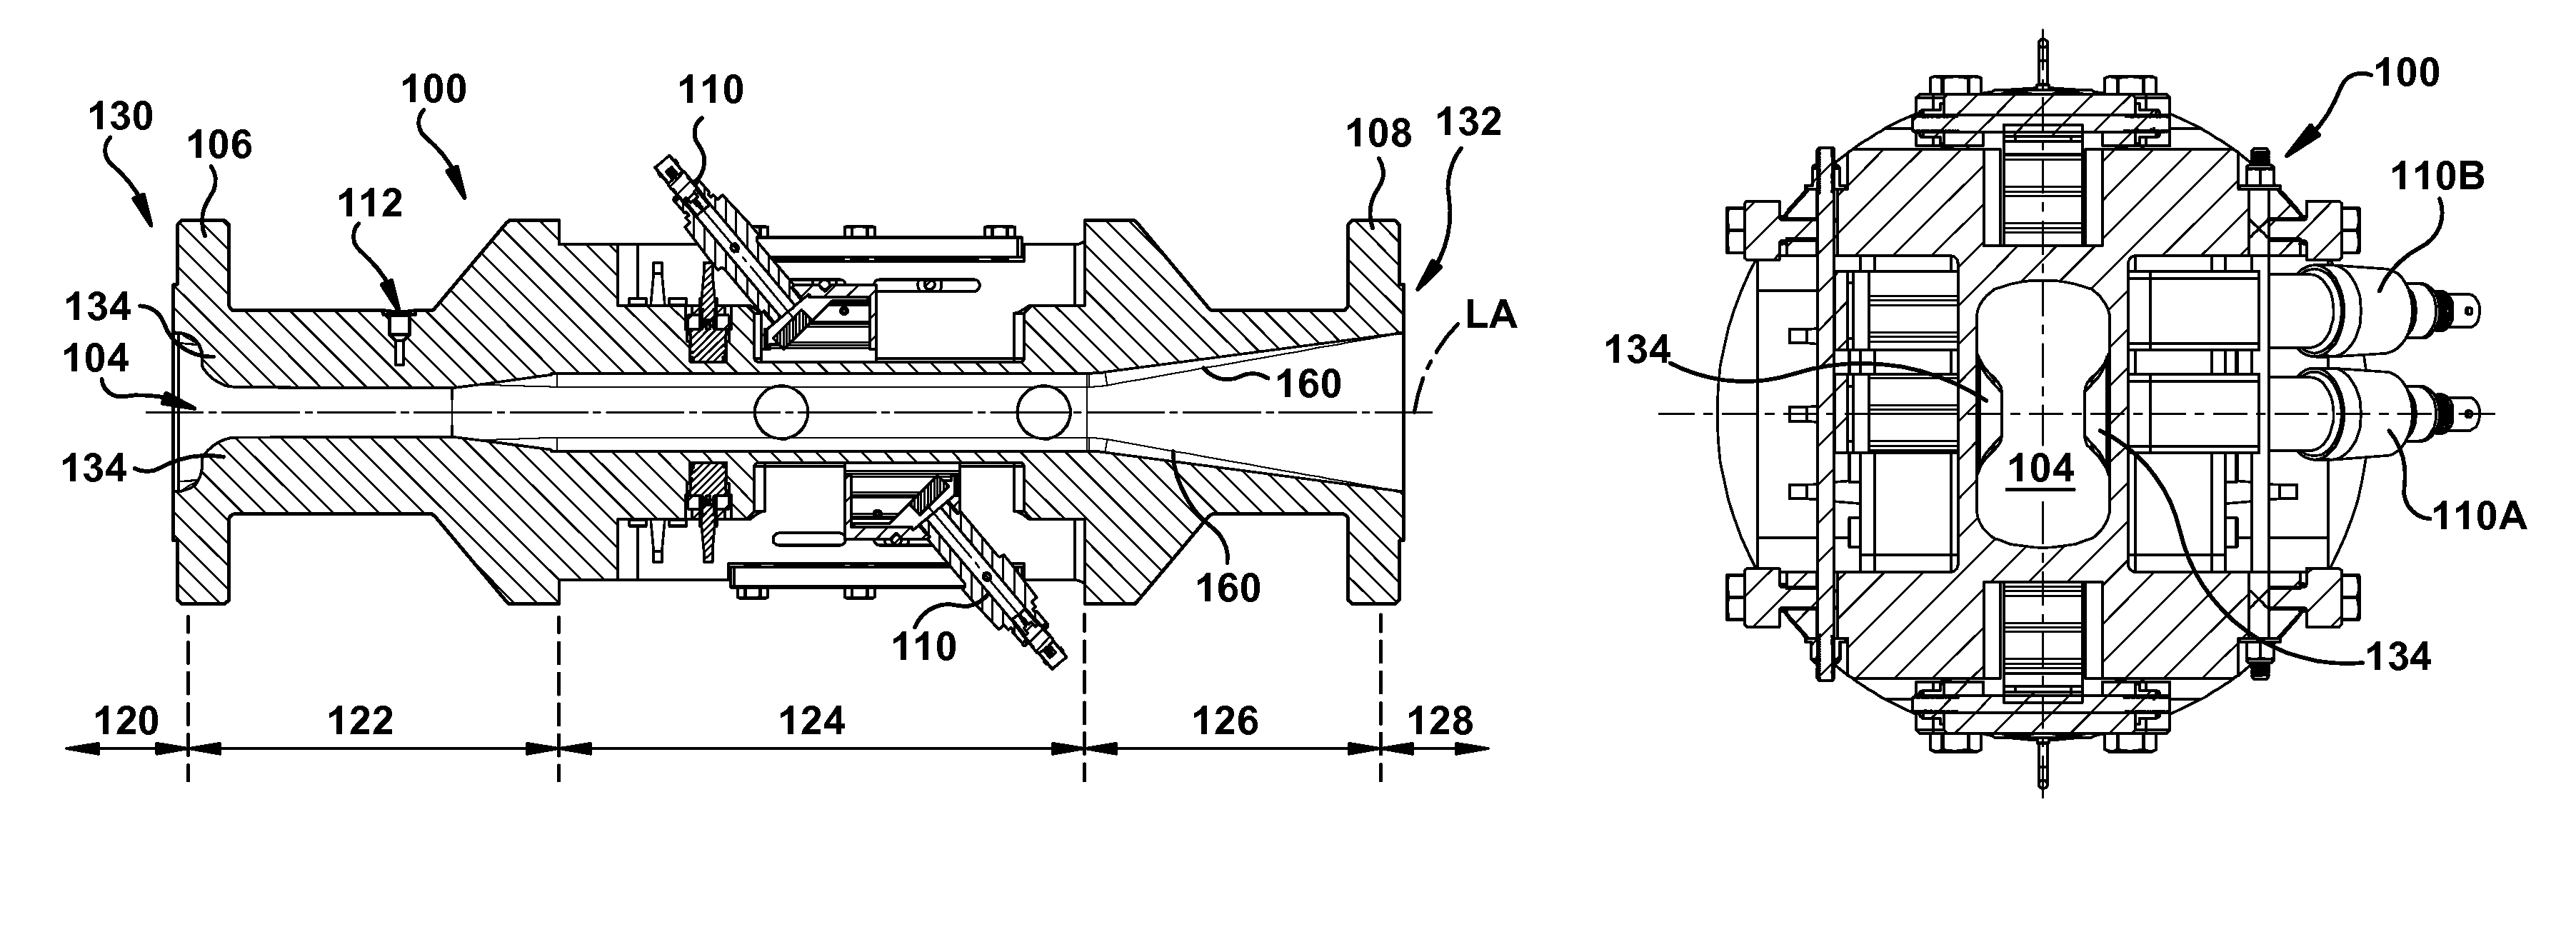 Flowmeter with a flow conditioner formed by a protrusion having restriction provided upstream of the measurement section